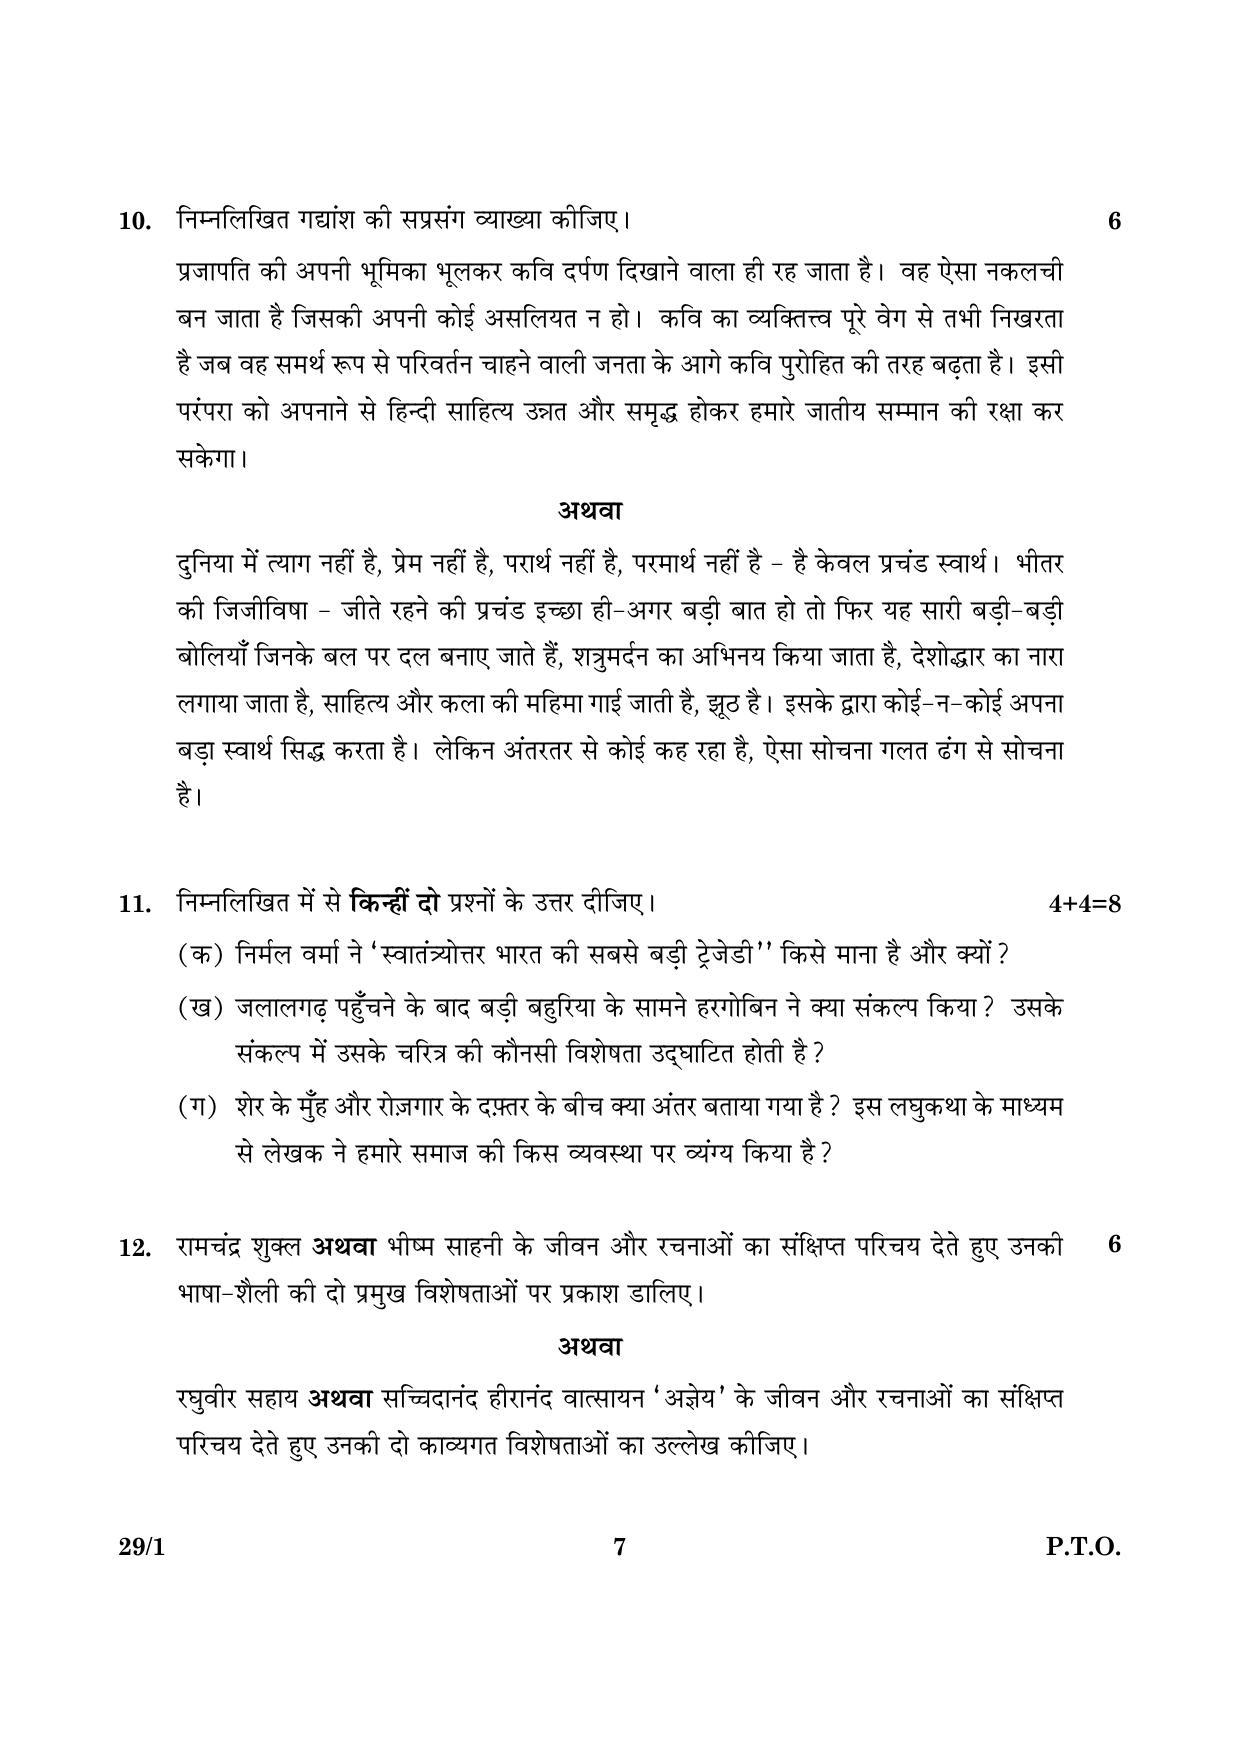 CBSE Class 12 029 Set 1 Hindi Elective 2016 Question Paper - Page 7